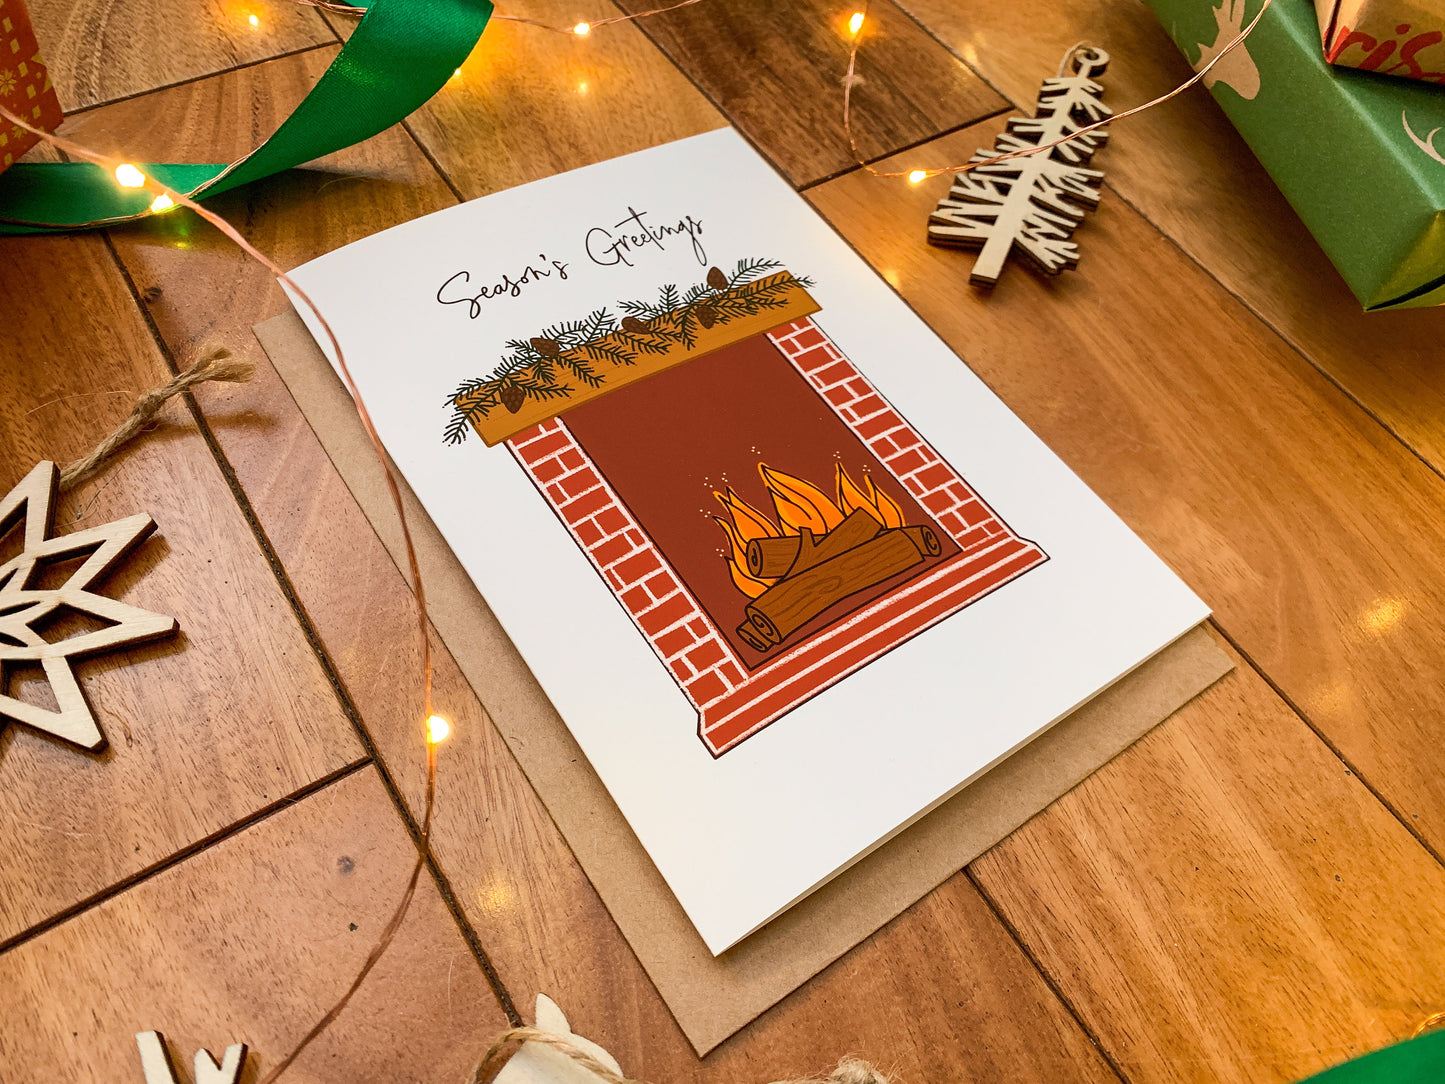 Vintage Inspired Nordic Designed Season's Greetings Fireplace Holiday Card by StoneDonut Design